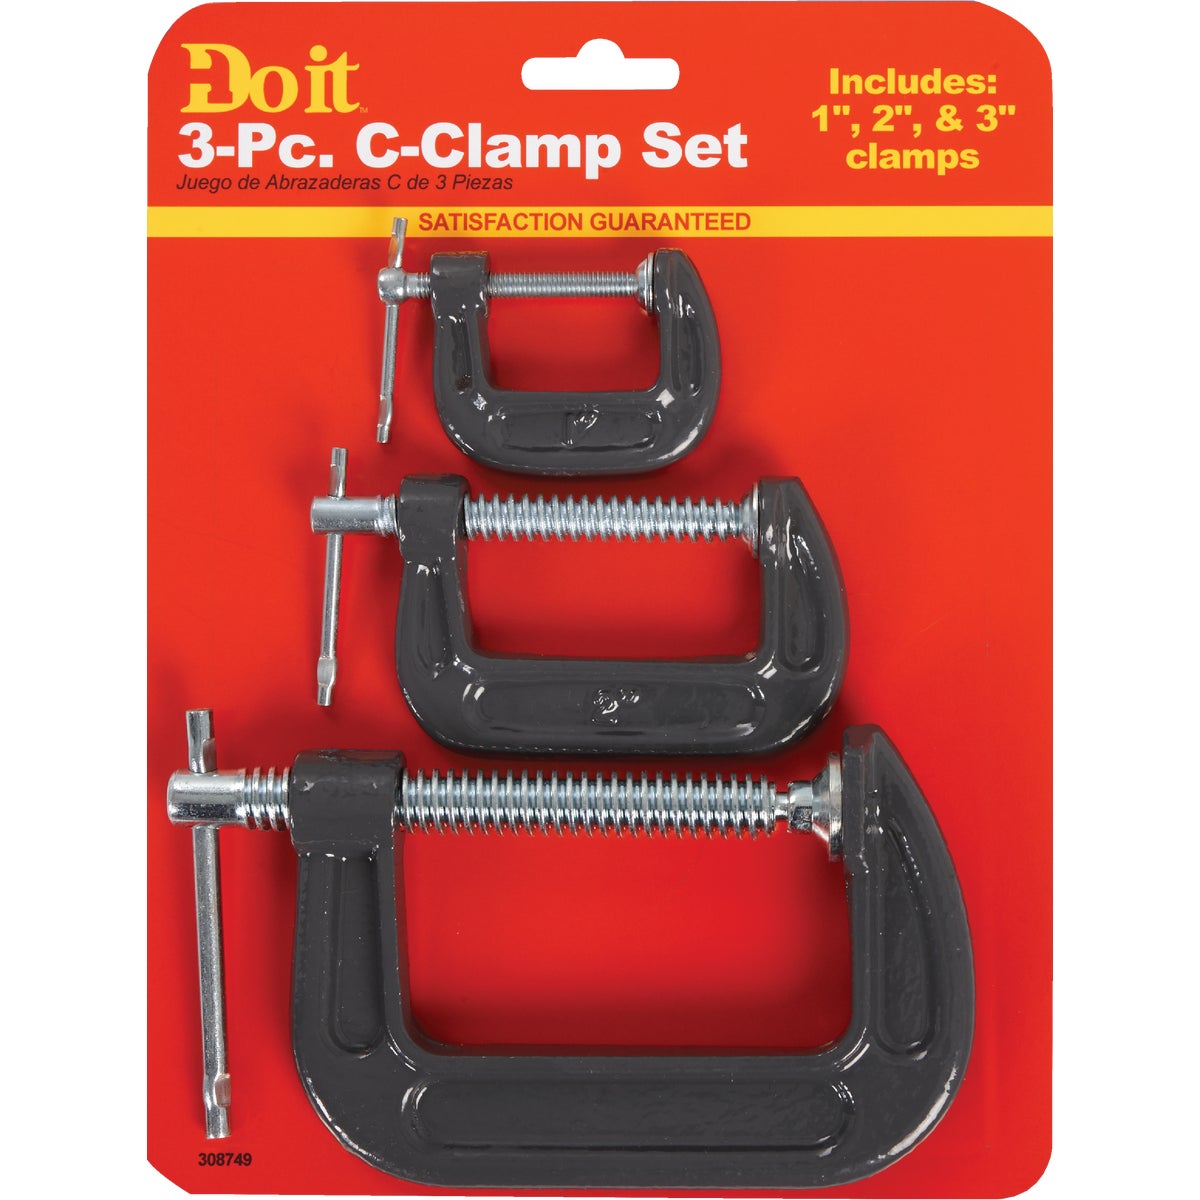 Do it 1 In., 2 In. & 3 In. C-Clamp Set (3-Piece)